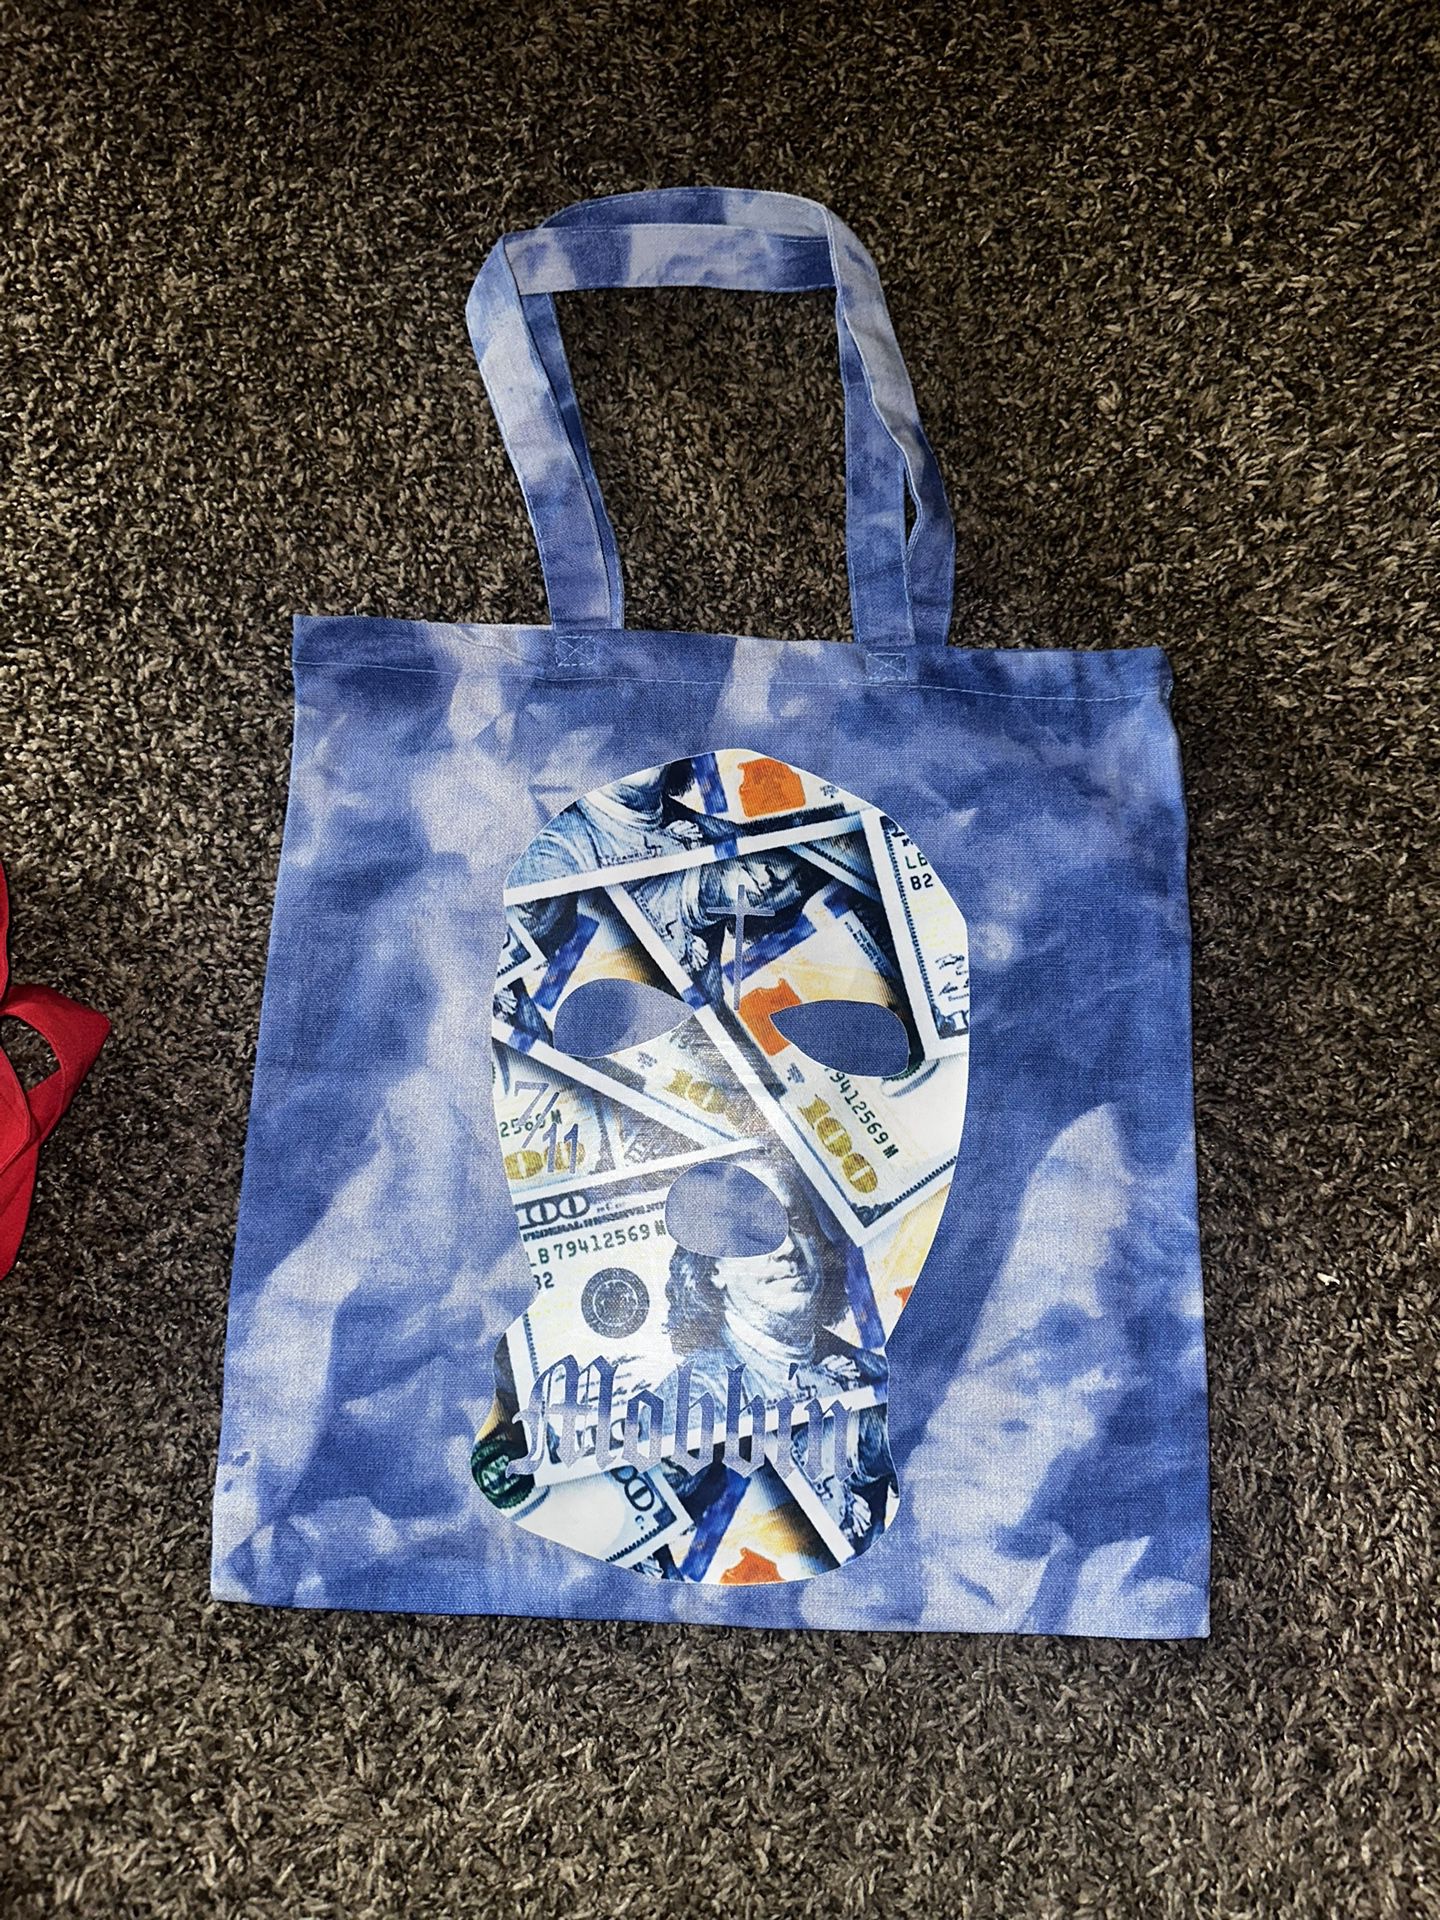 Blueface Tote Bag 1 Of 1 